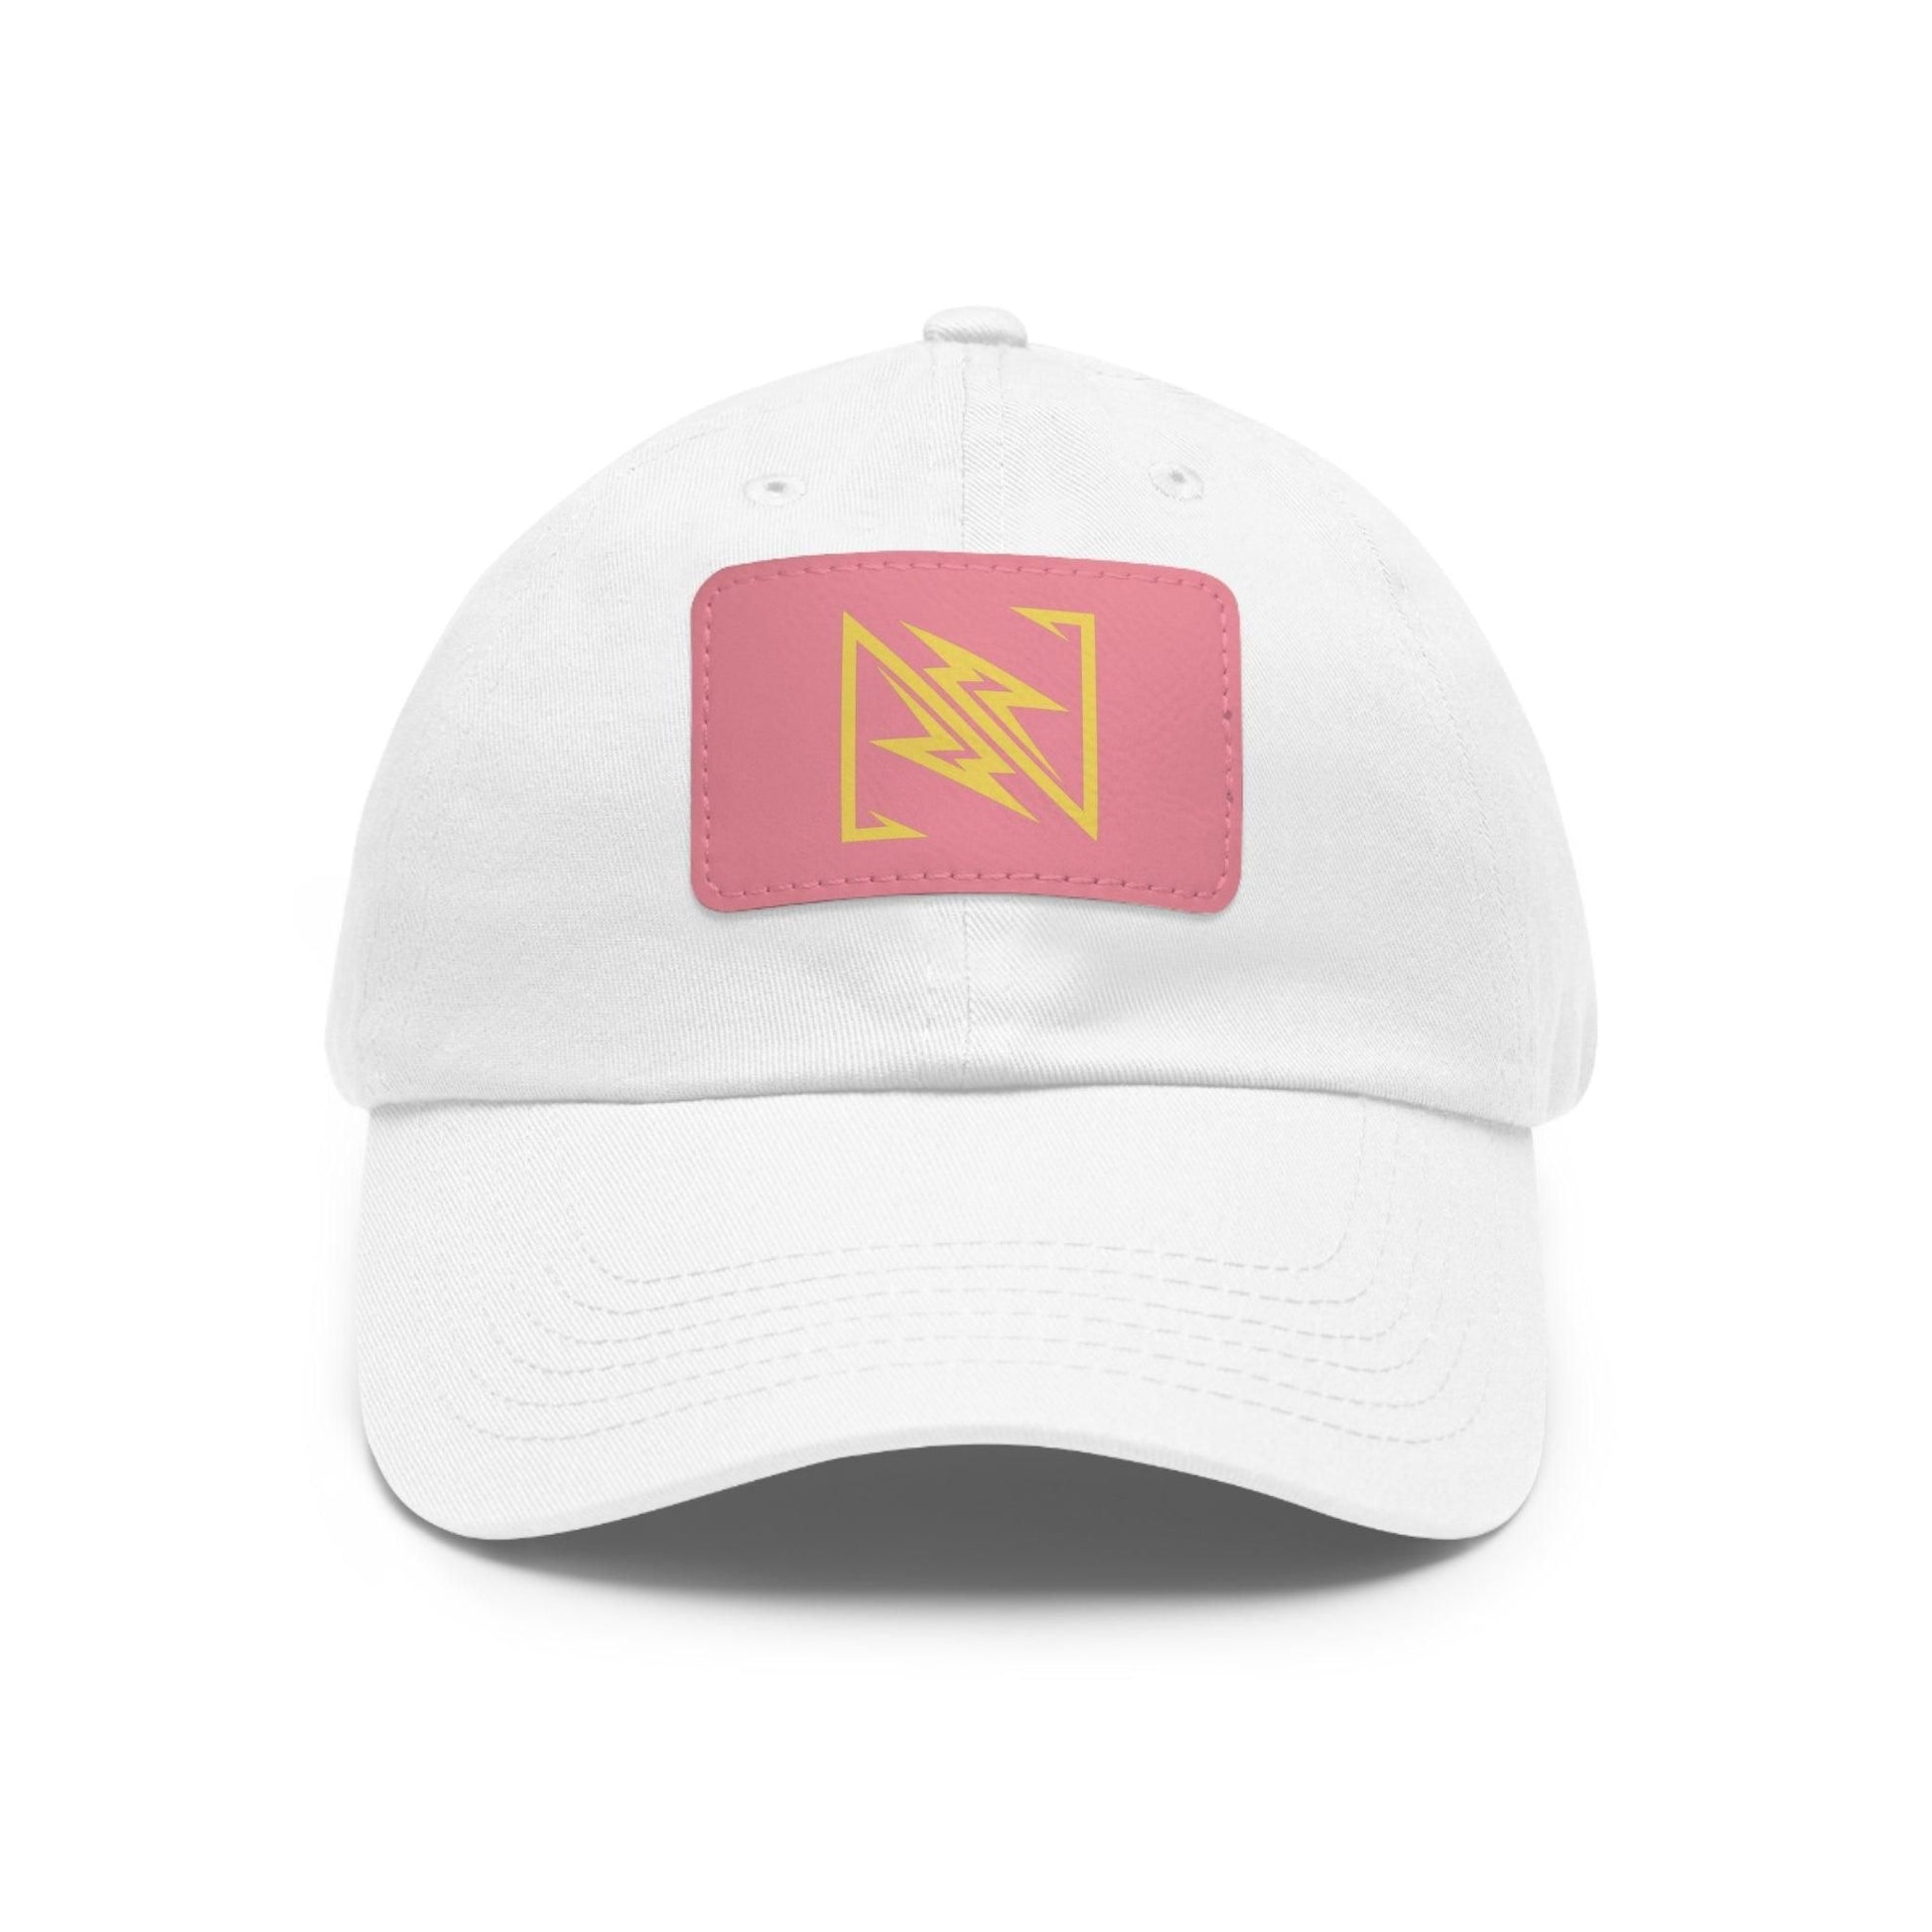 NX Vogue Premium Baseball Hat with Leather Patch Cap White / Pink patch Rectangle One size